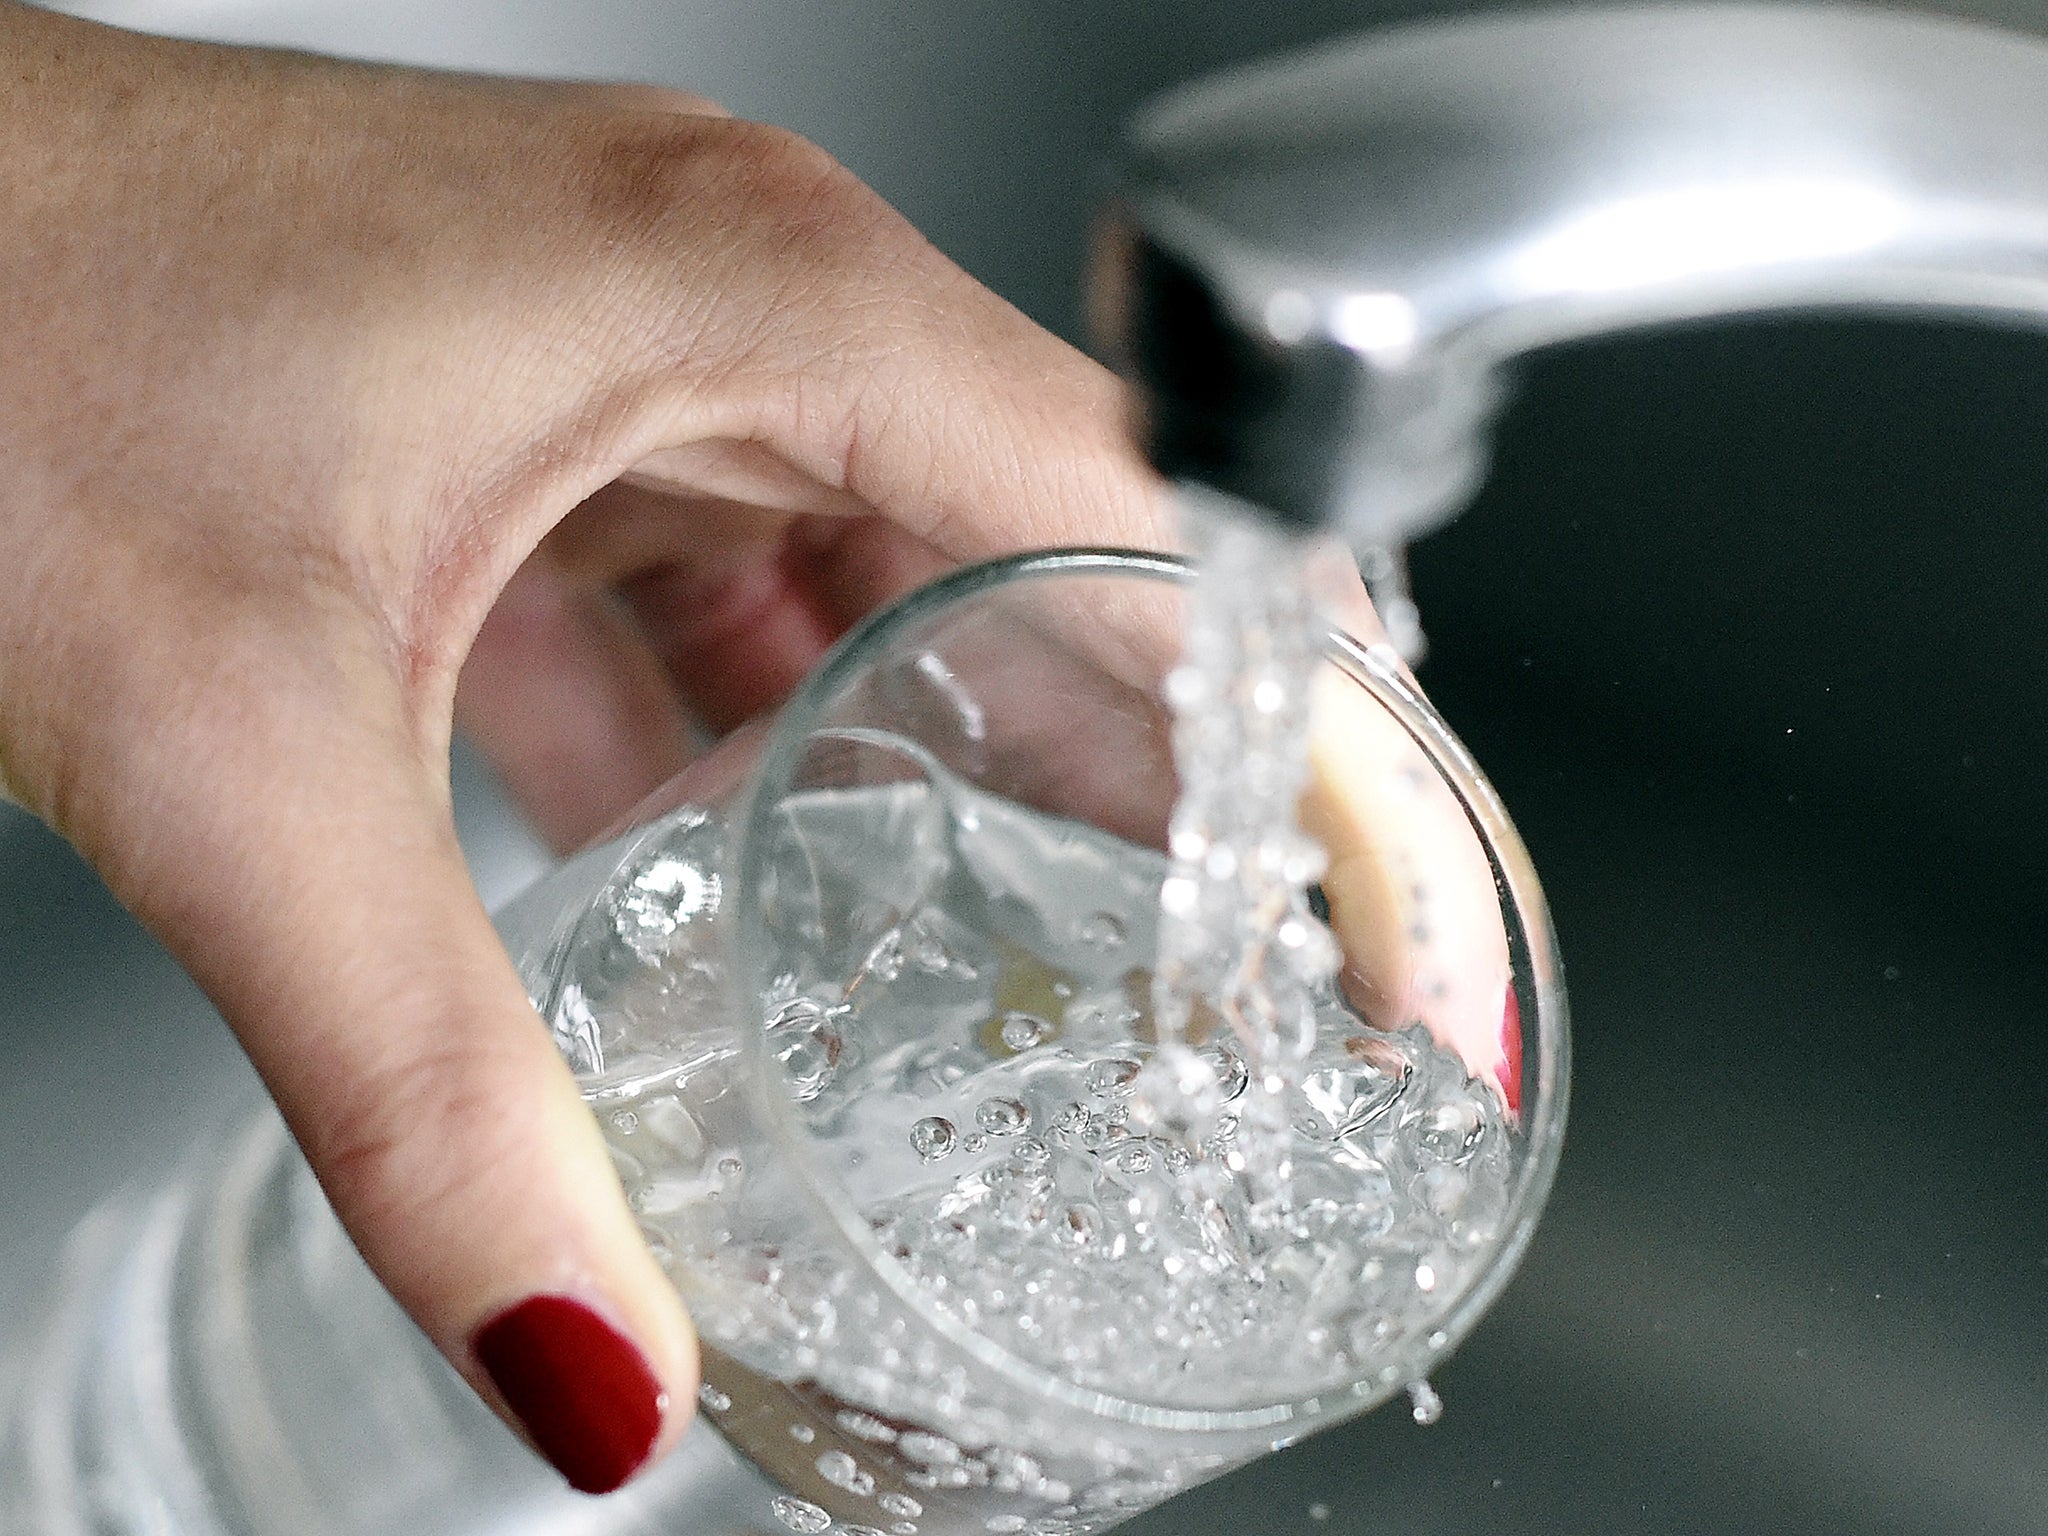 A woman fills up a glass with water.